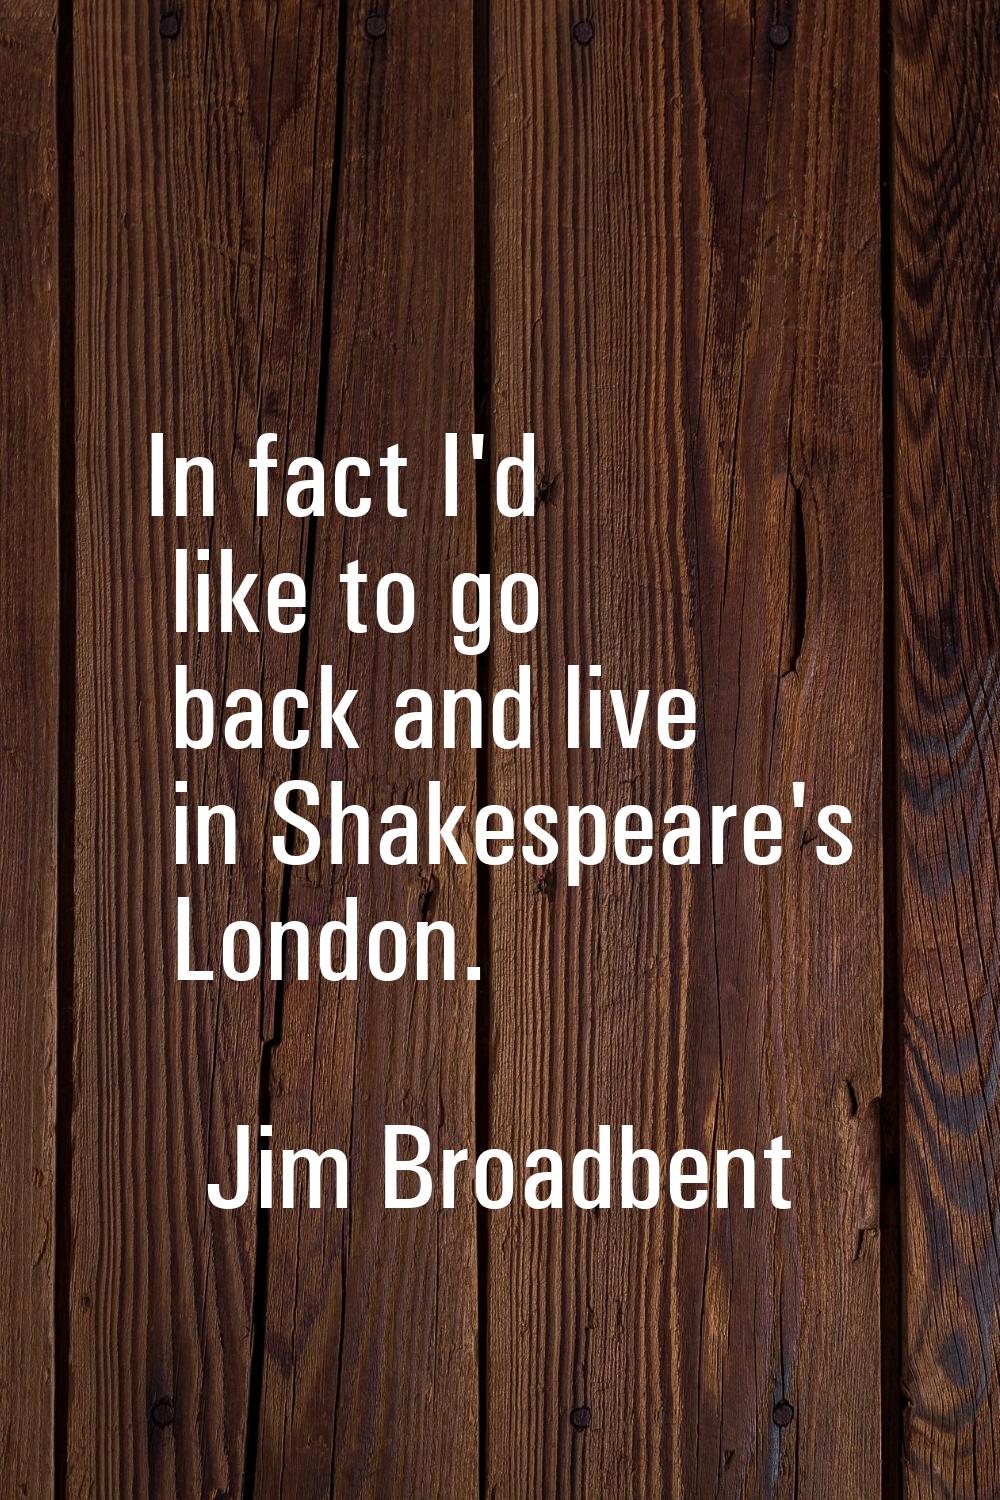 In fact I'd like to go back and live in Shakespeare's London.